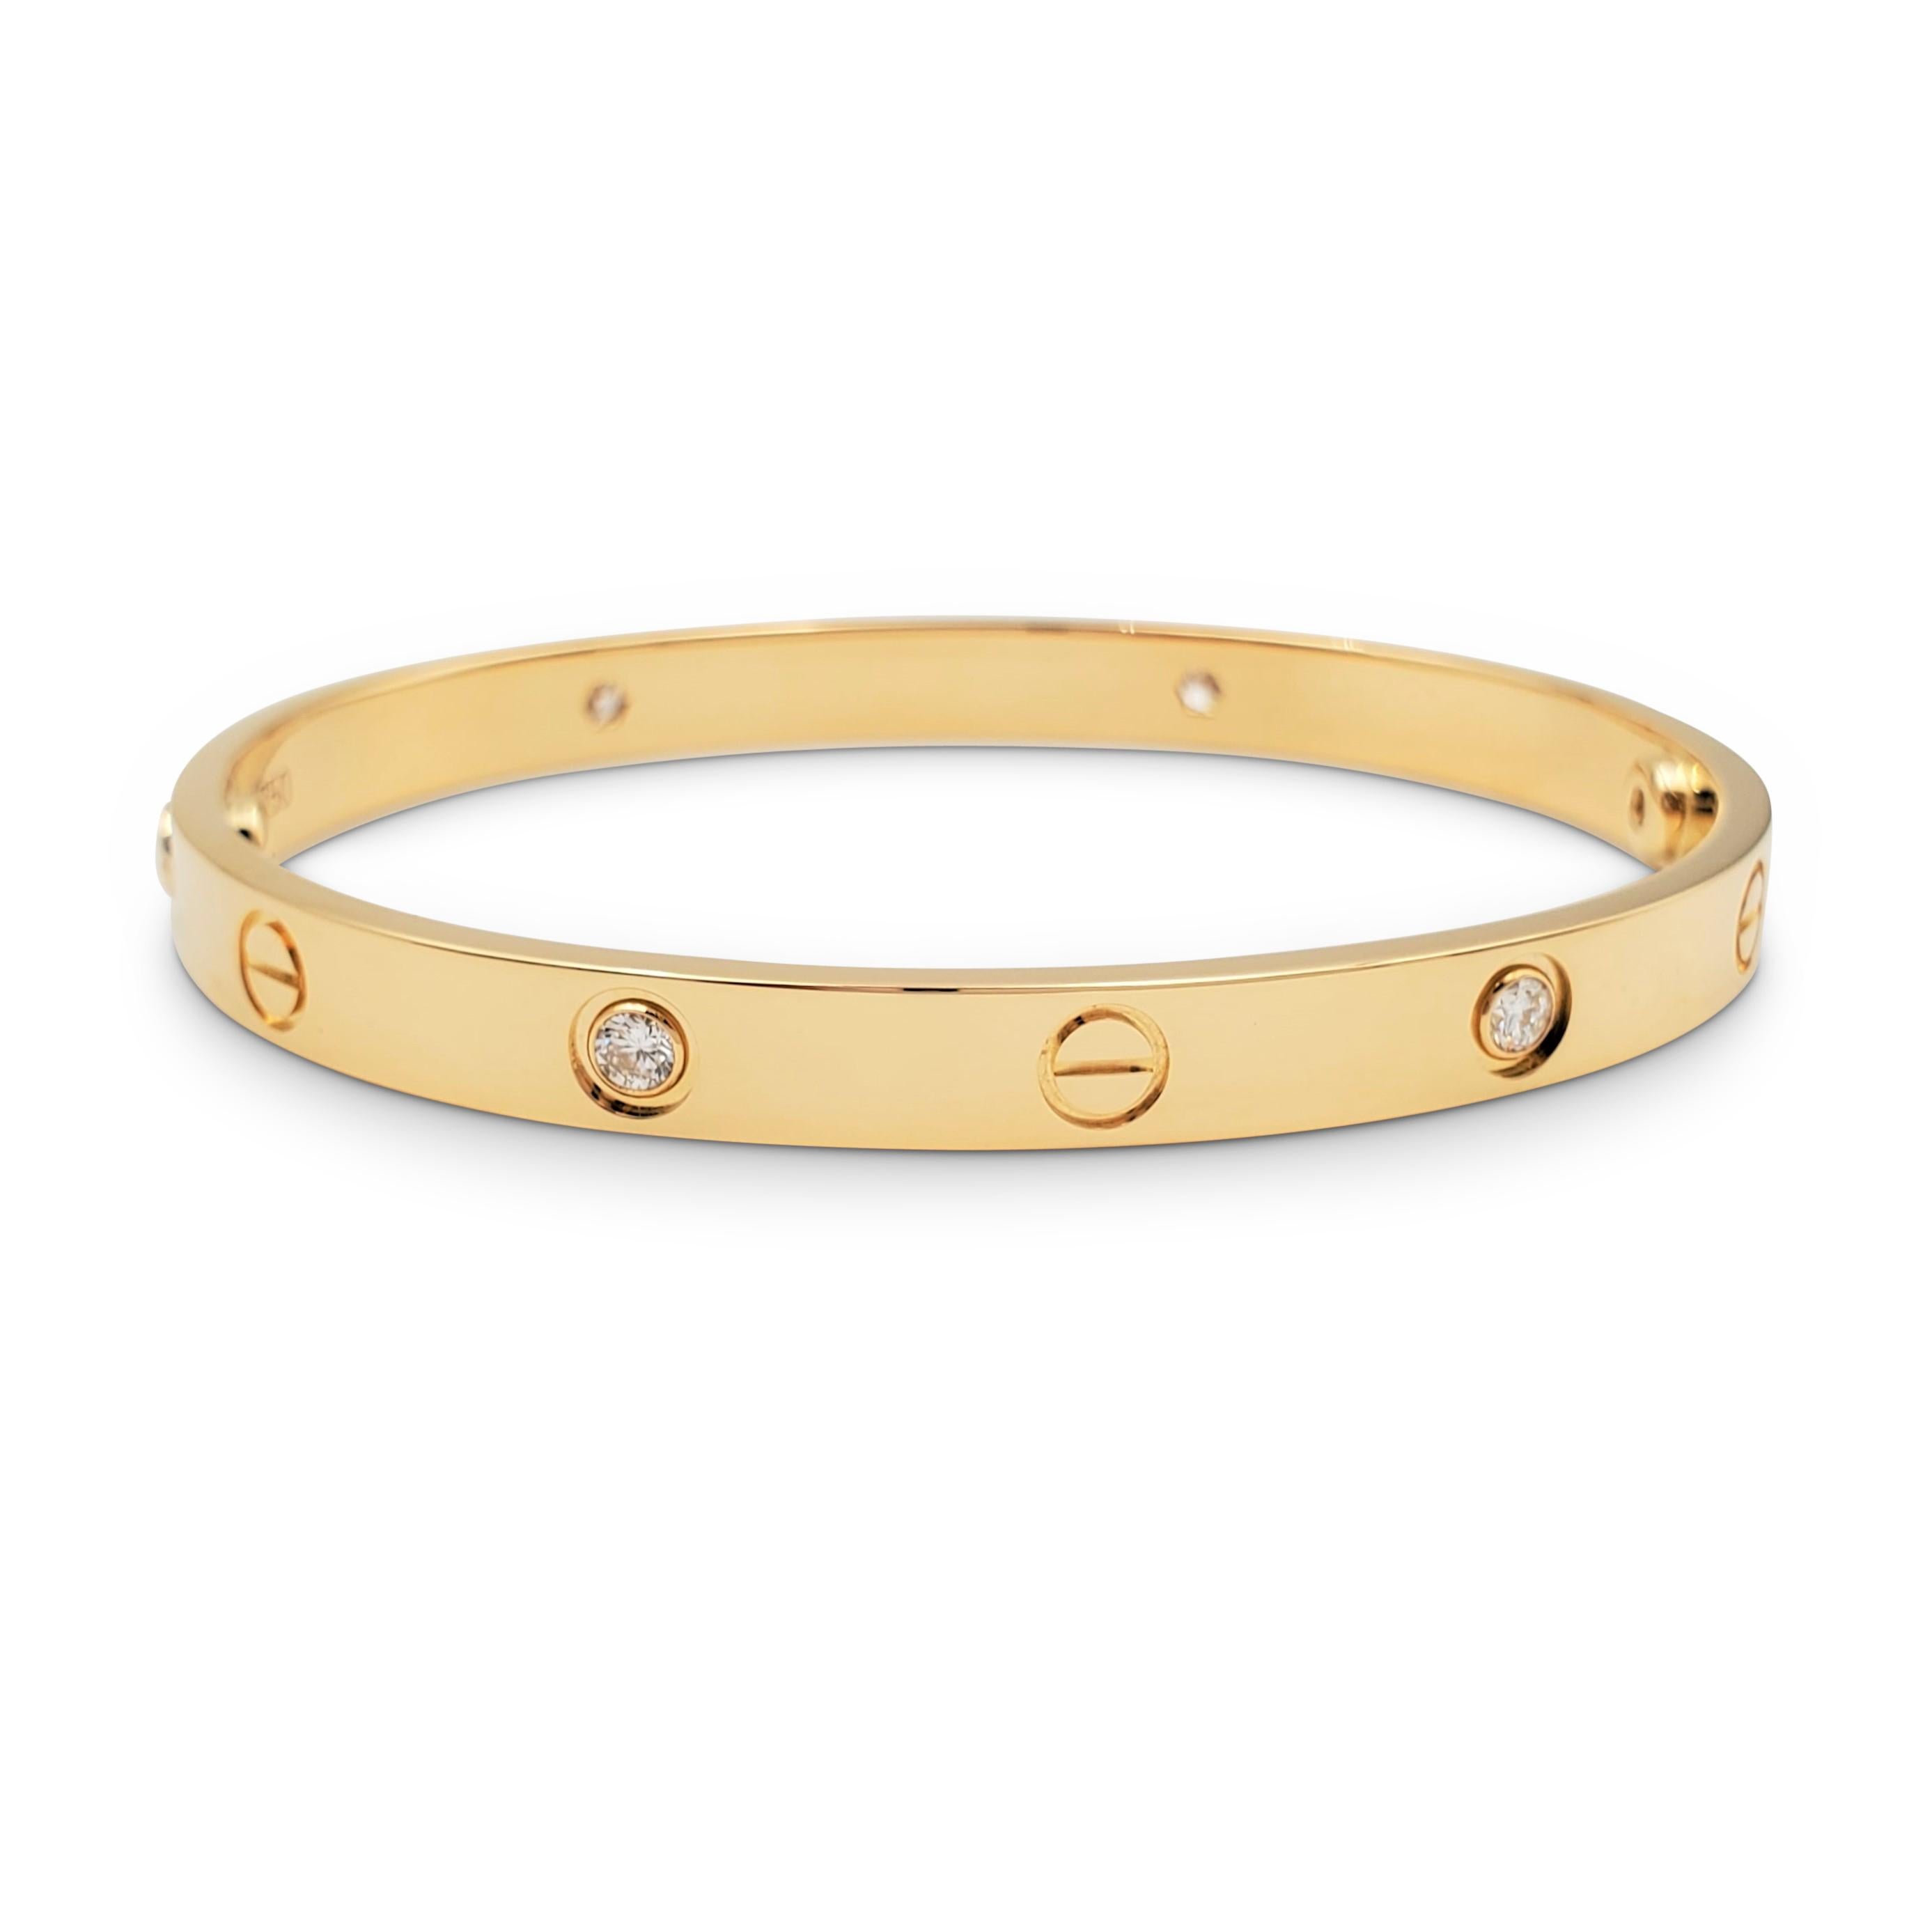 Authentic Cartier 'Love' bracelet crafted in 18 karat yellow gold and set with four high-quality round brilliant cut diamonds (E-F color, VS clarity) weighing an estimated 0.42 carats total. Size 18. Signed Cartier, 750, 18, with serial number and